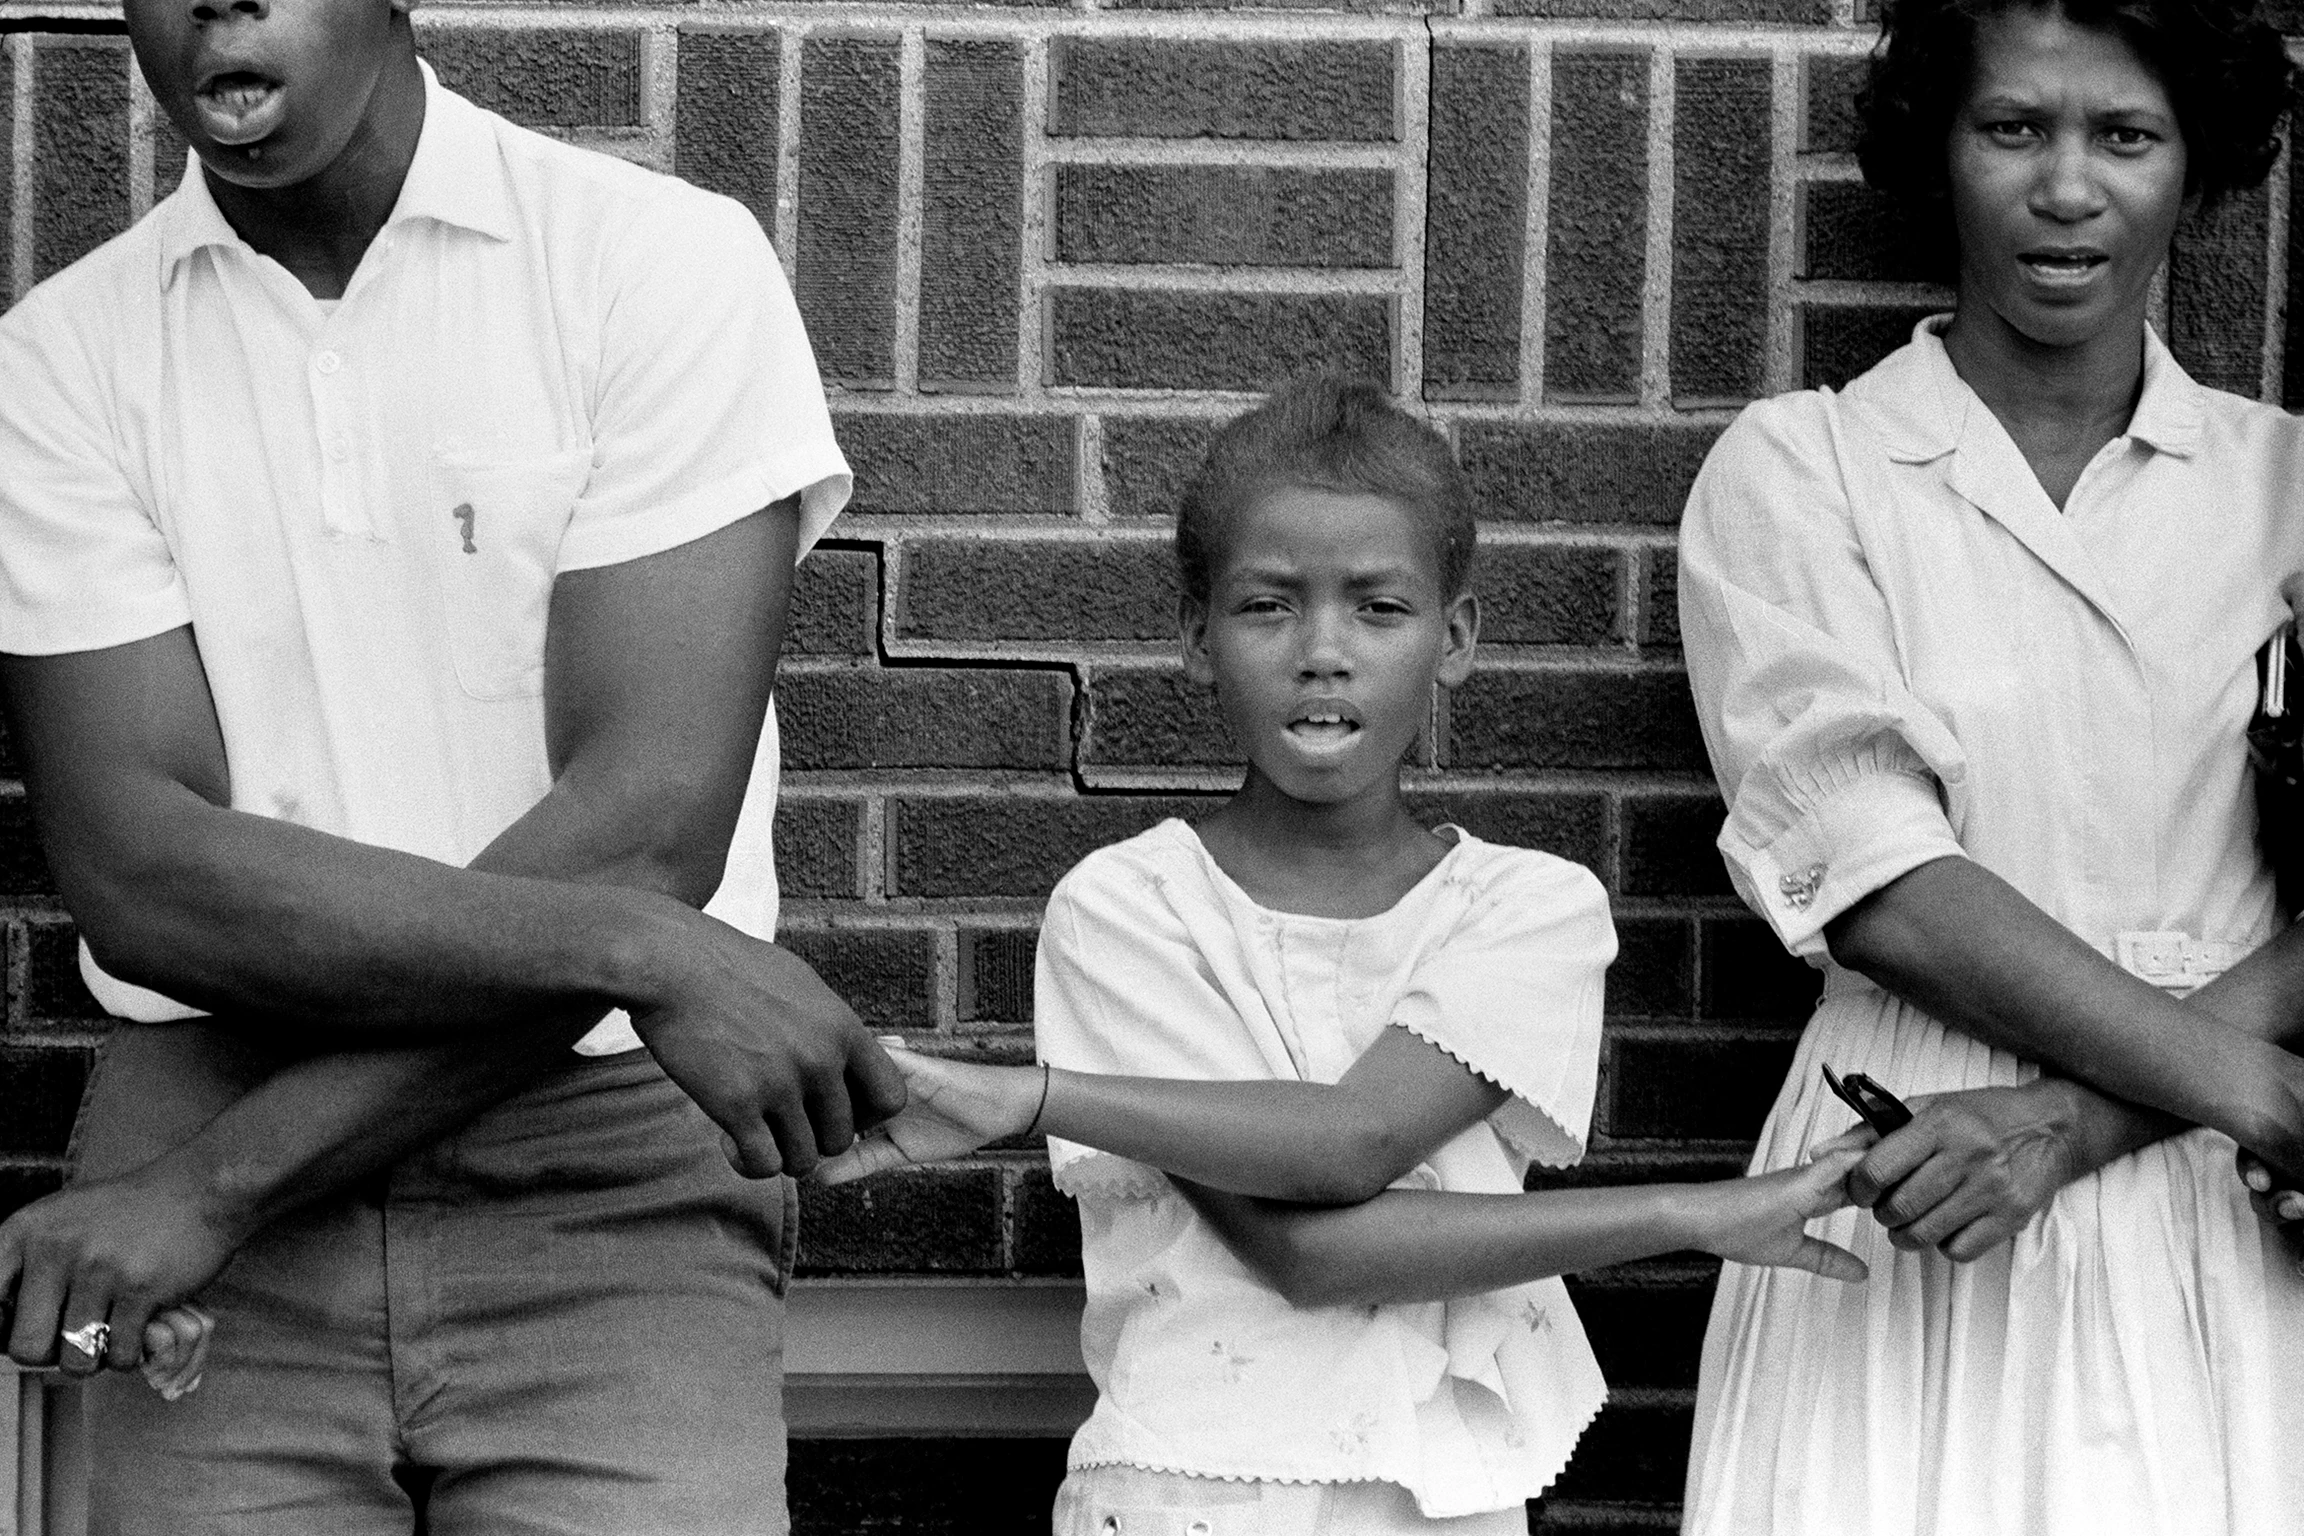 In black and white, three demonstrators from the Student Nonviolent Coordinating Committee stand together, holding hands